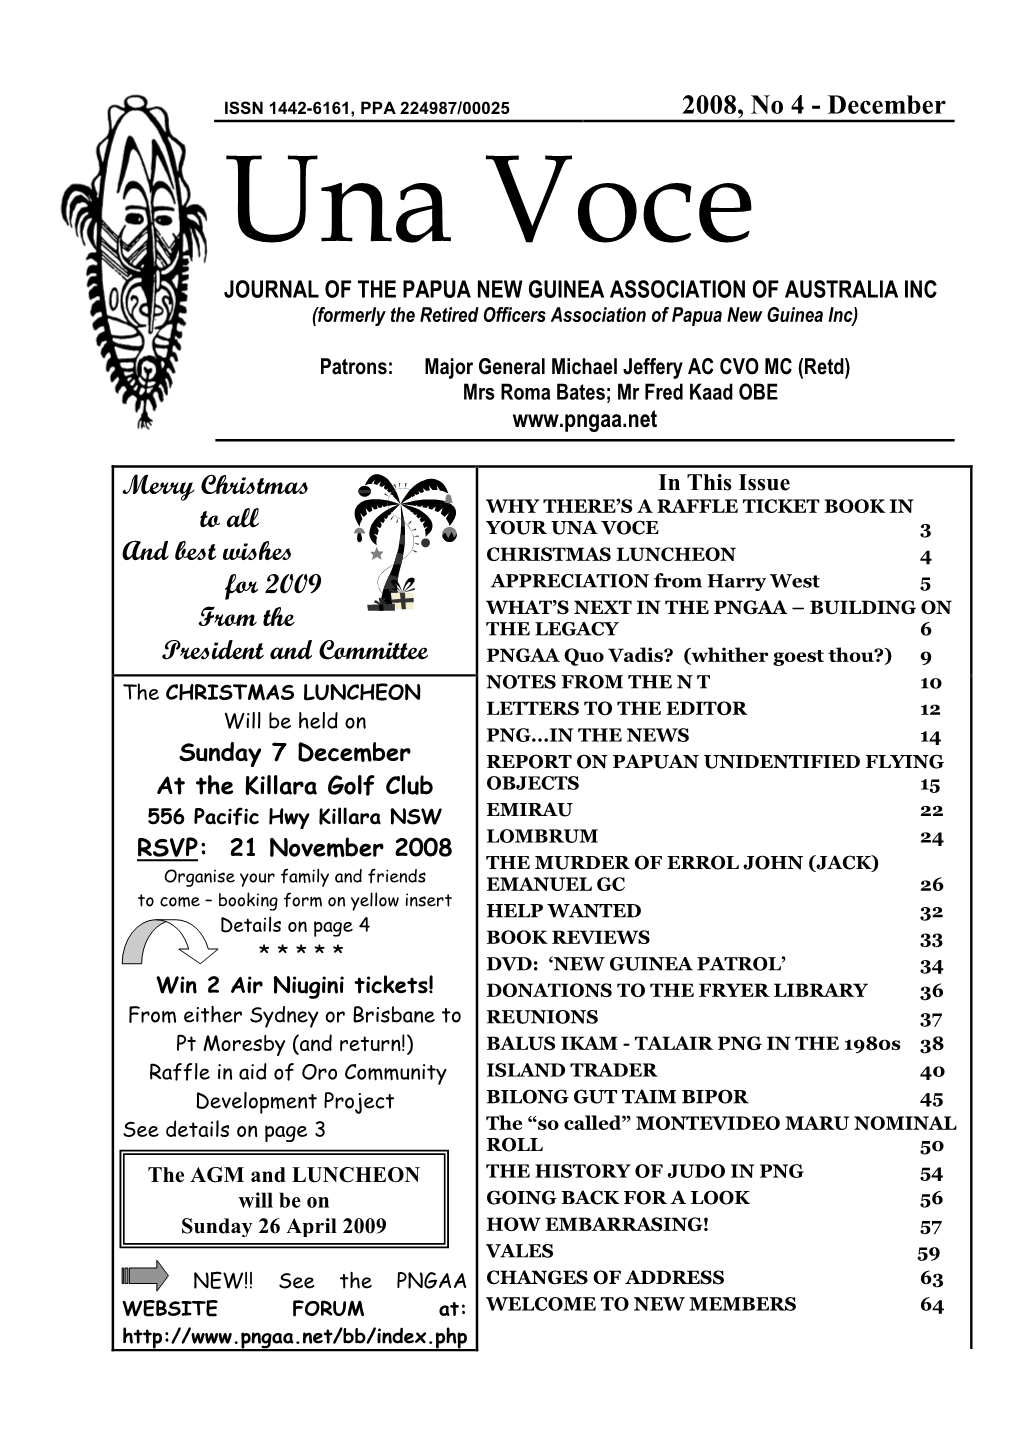 2008, No 4 - December Una Voce JOURNAL of the PAPUA NEW GUINEA ASSOCIATION of AUSTRALIA INC (Formerly the Retired Officers Association of Papua New Guinea Inc)